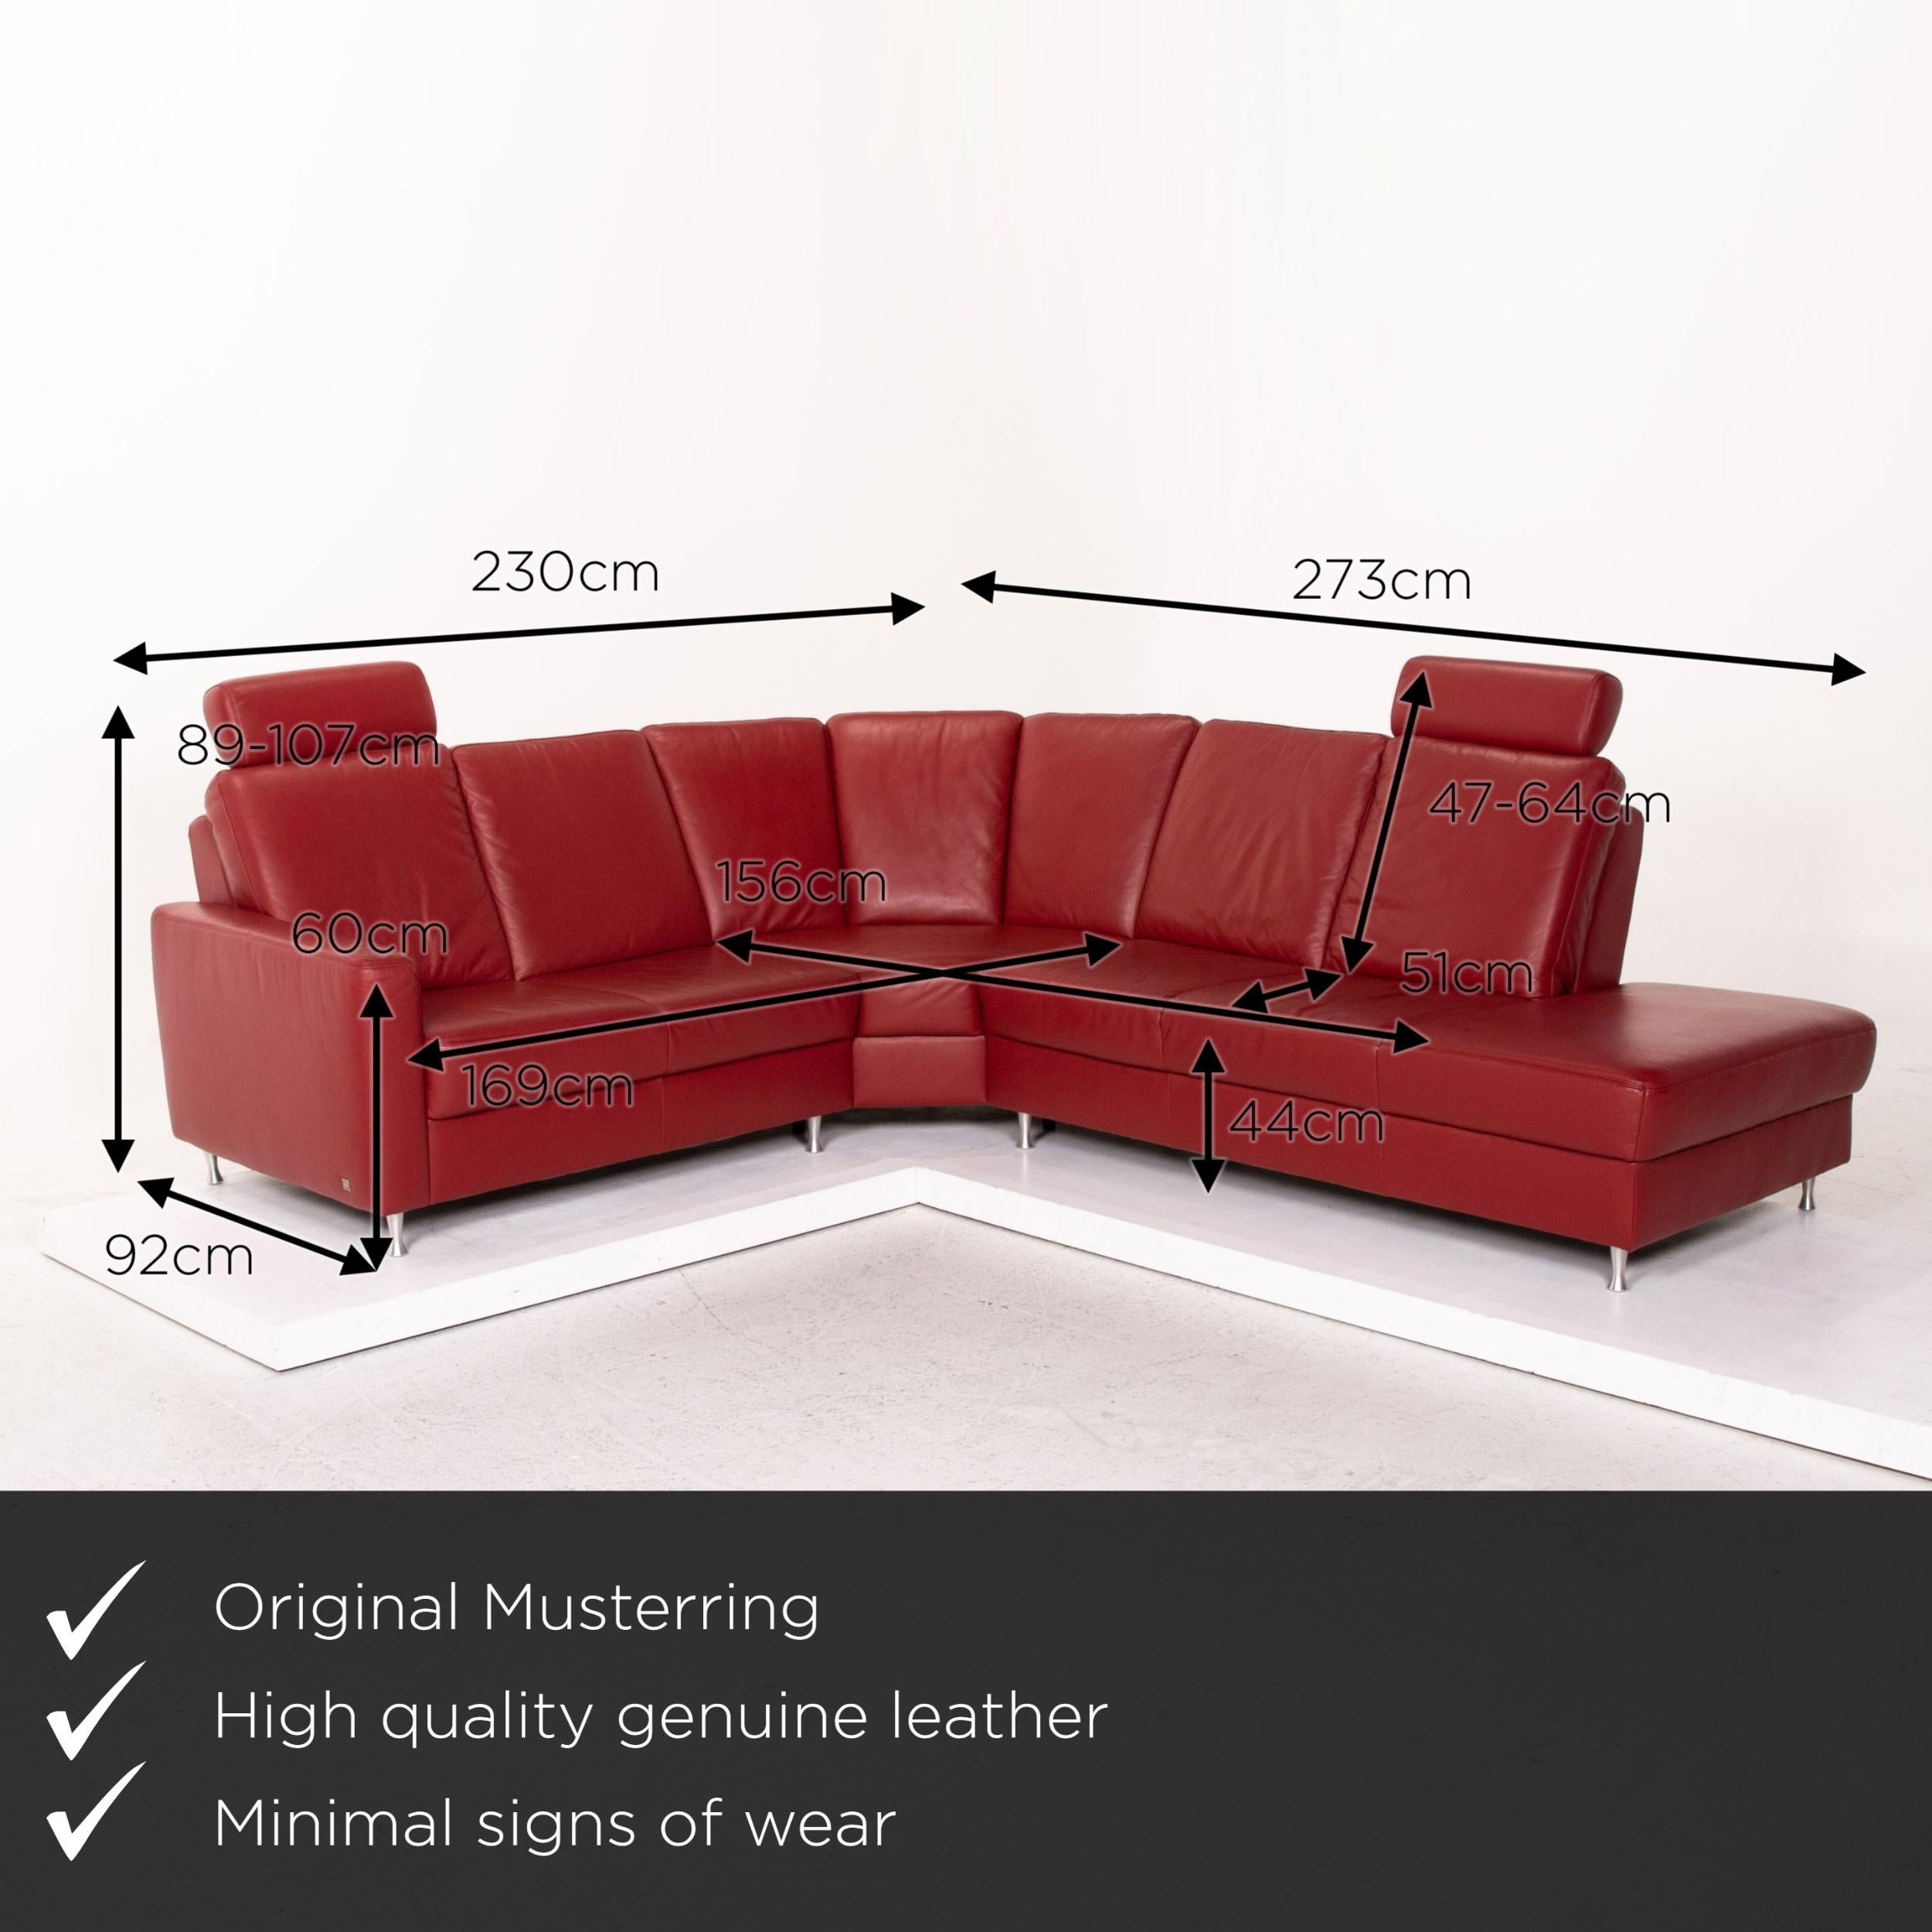 We present to you a Sample ring leather corner sofa red dark red sofa function couch.
 

 Product measurements in centimeters:
 

Depth 92
Width 230
Height 89
Seat height 44
Rest height 60
Seat depth 51
Seat width 169
Back height 47.
 